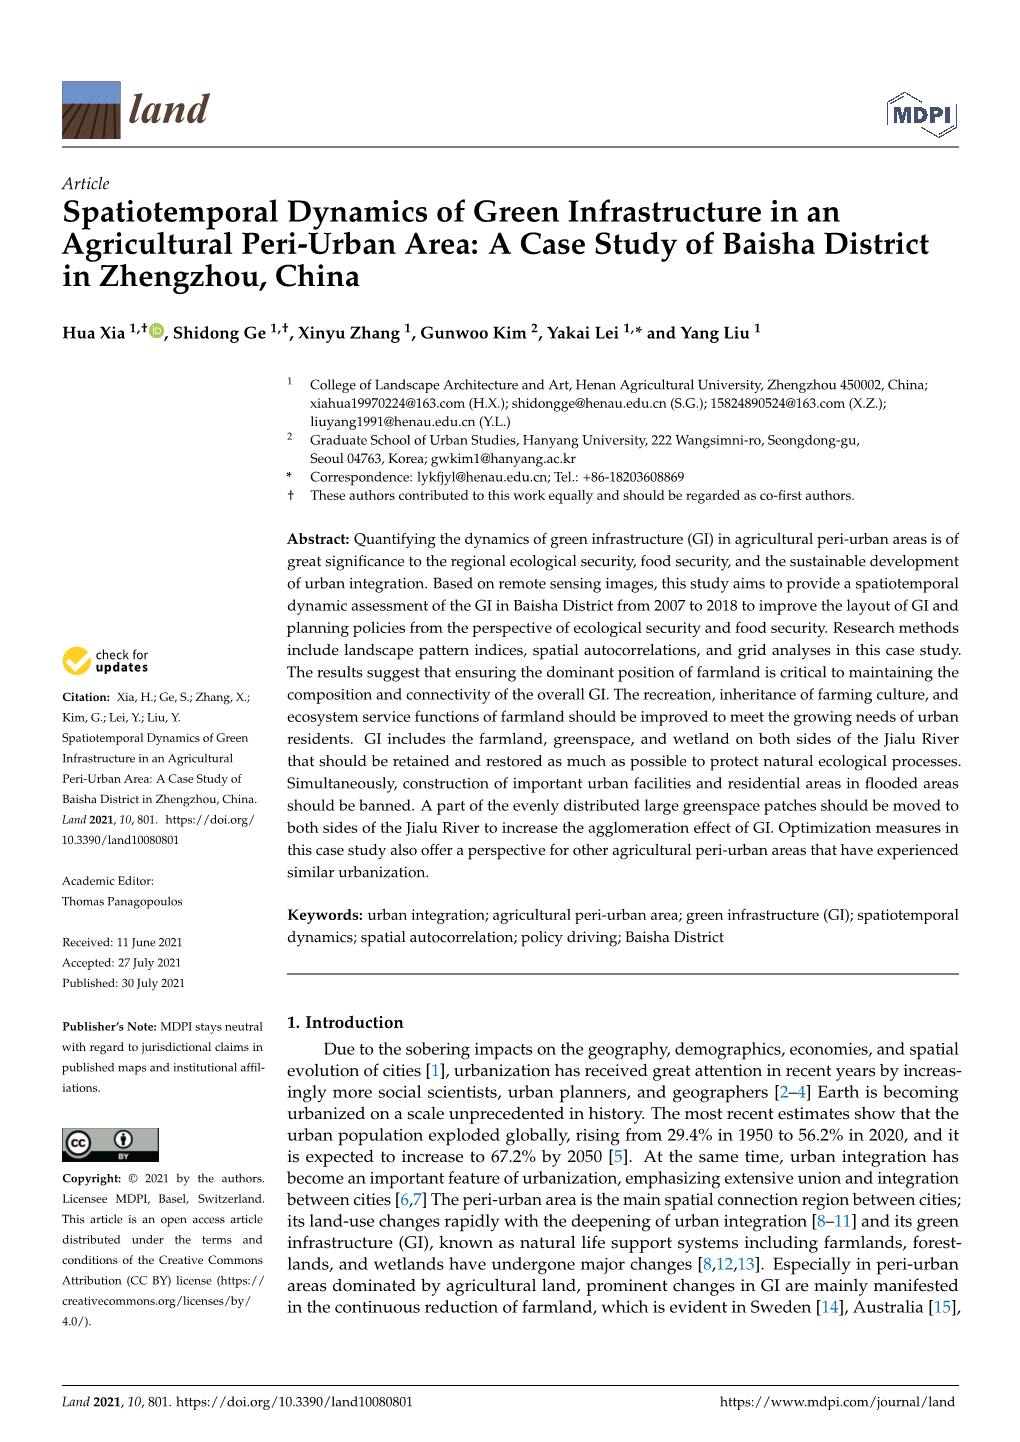 Spatiotemporal Dynamics of Green Infrastructure in an Agricultural Peri-Urban Area: a Case Study of Baisha District in Zhengzhou, China